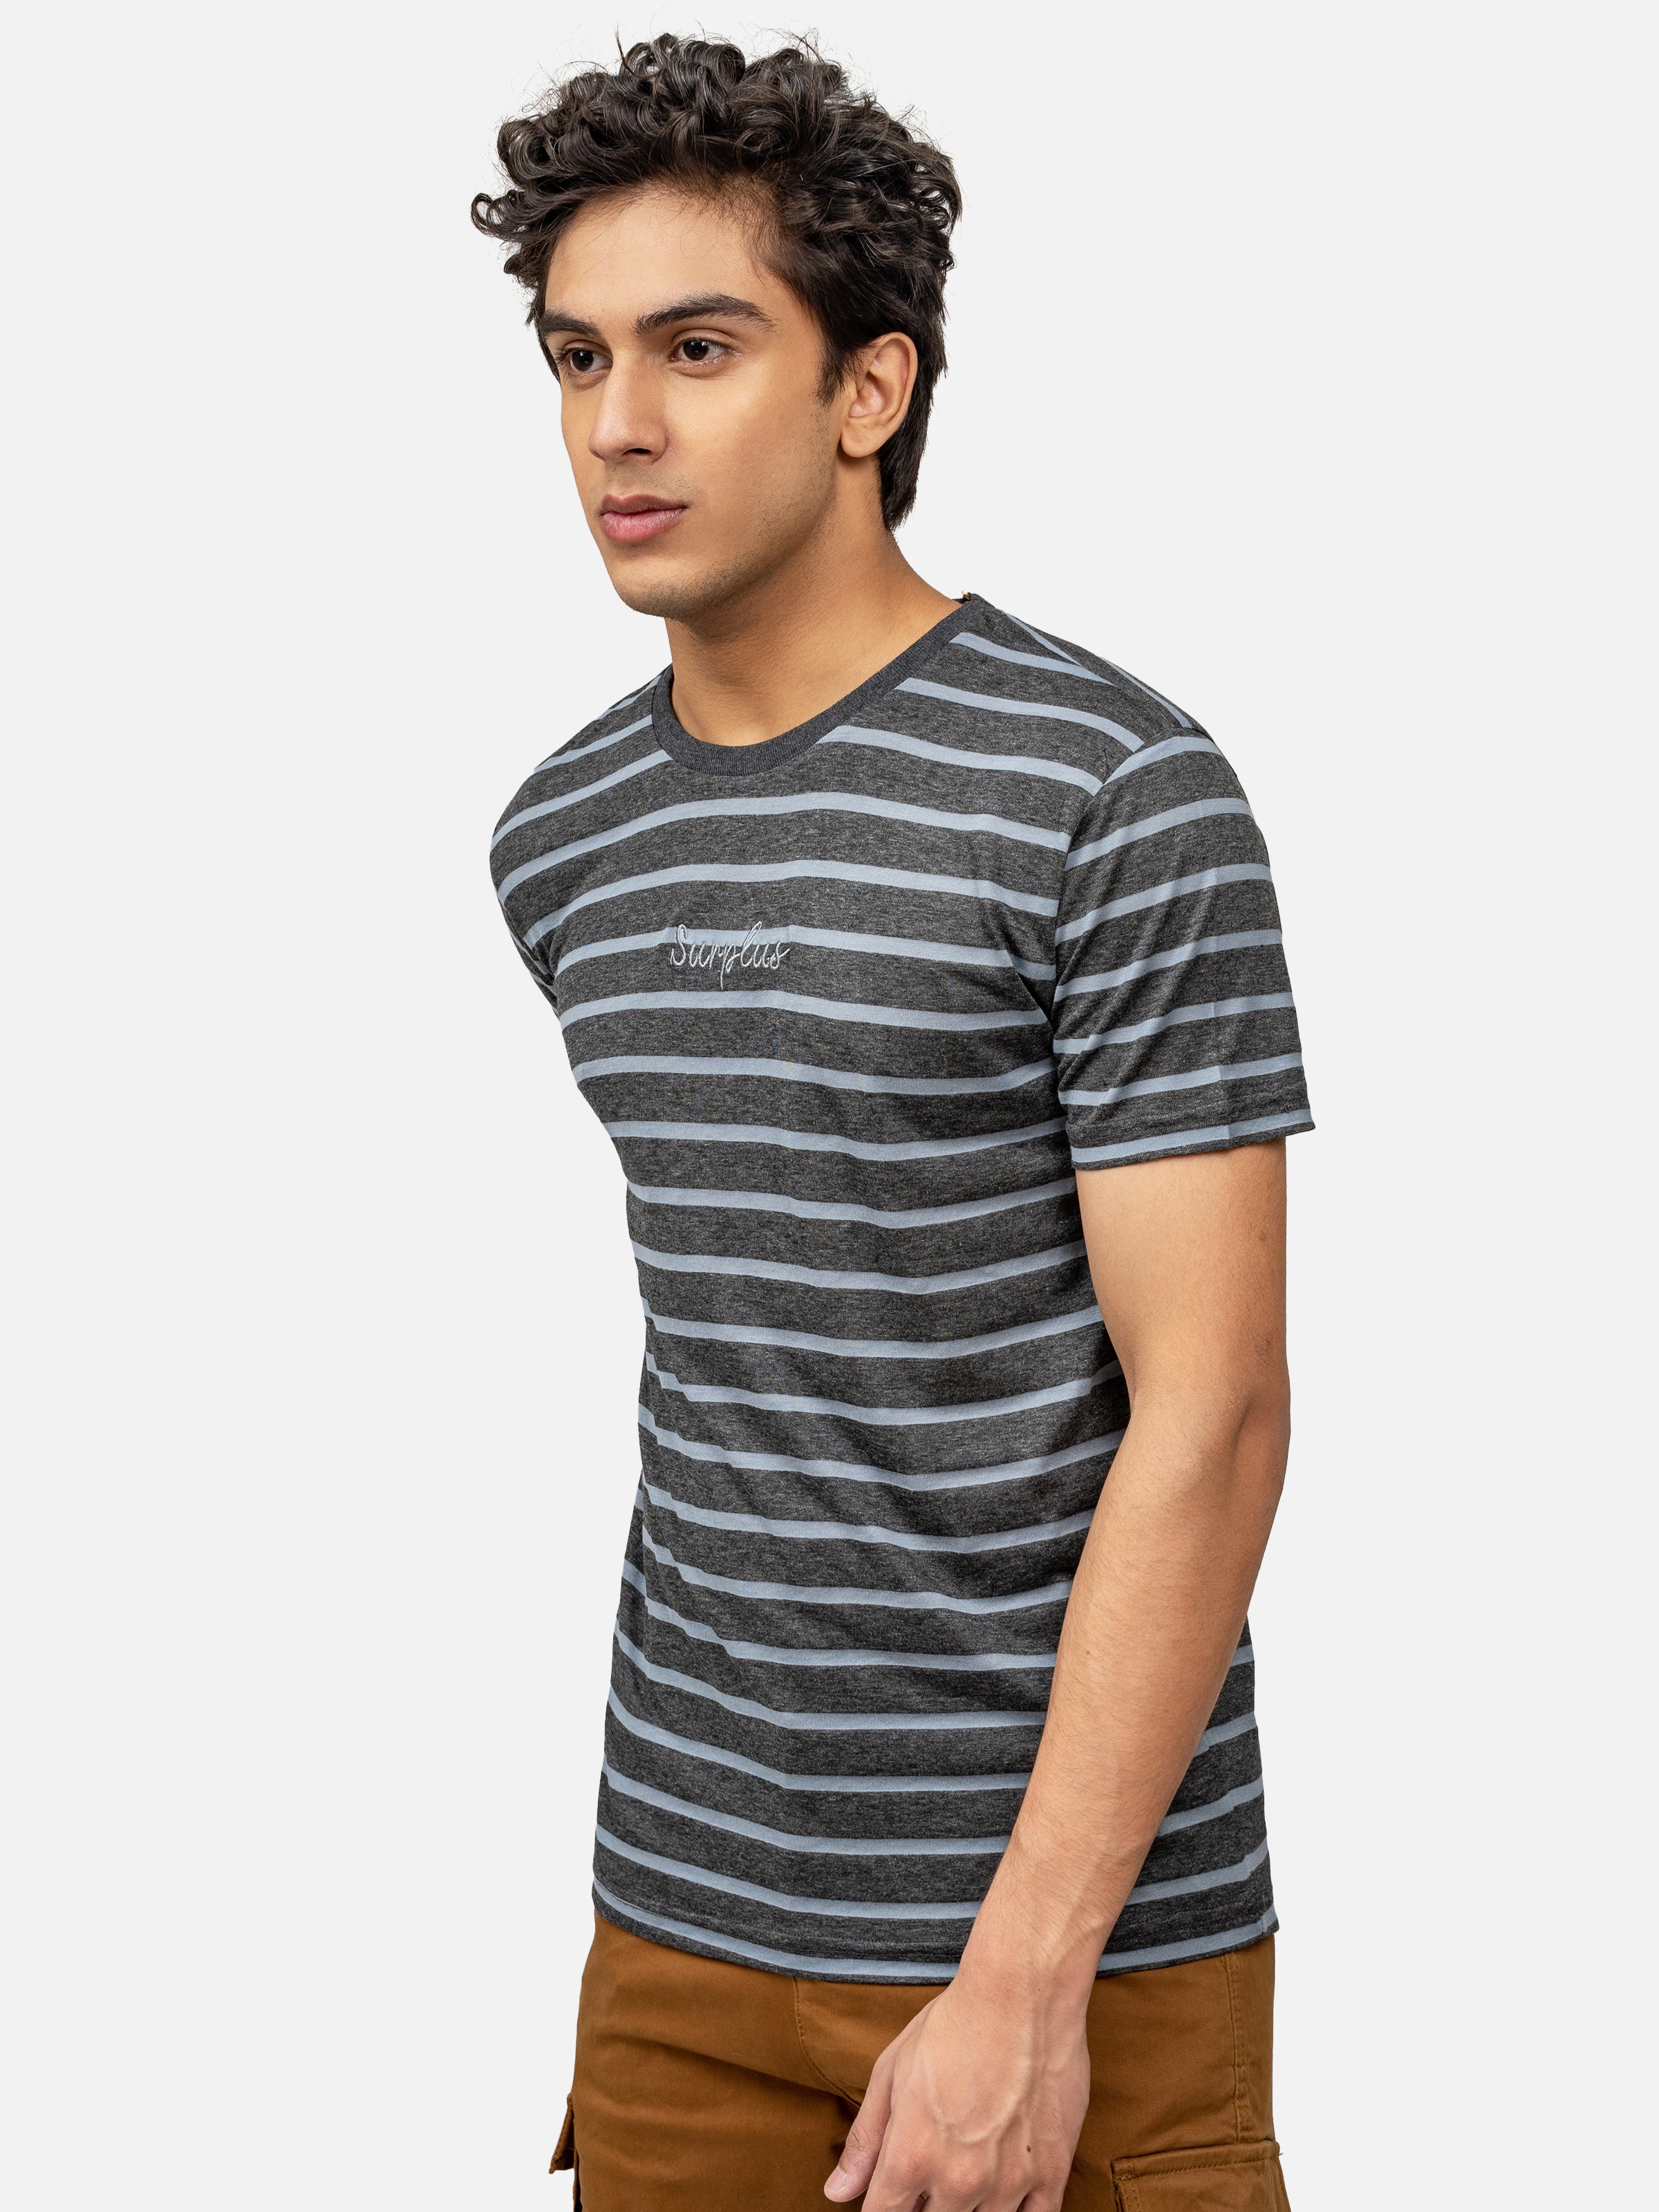 T SHIRT YARN DYED ROUND NECK CHARCOAL